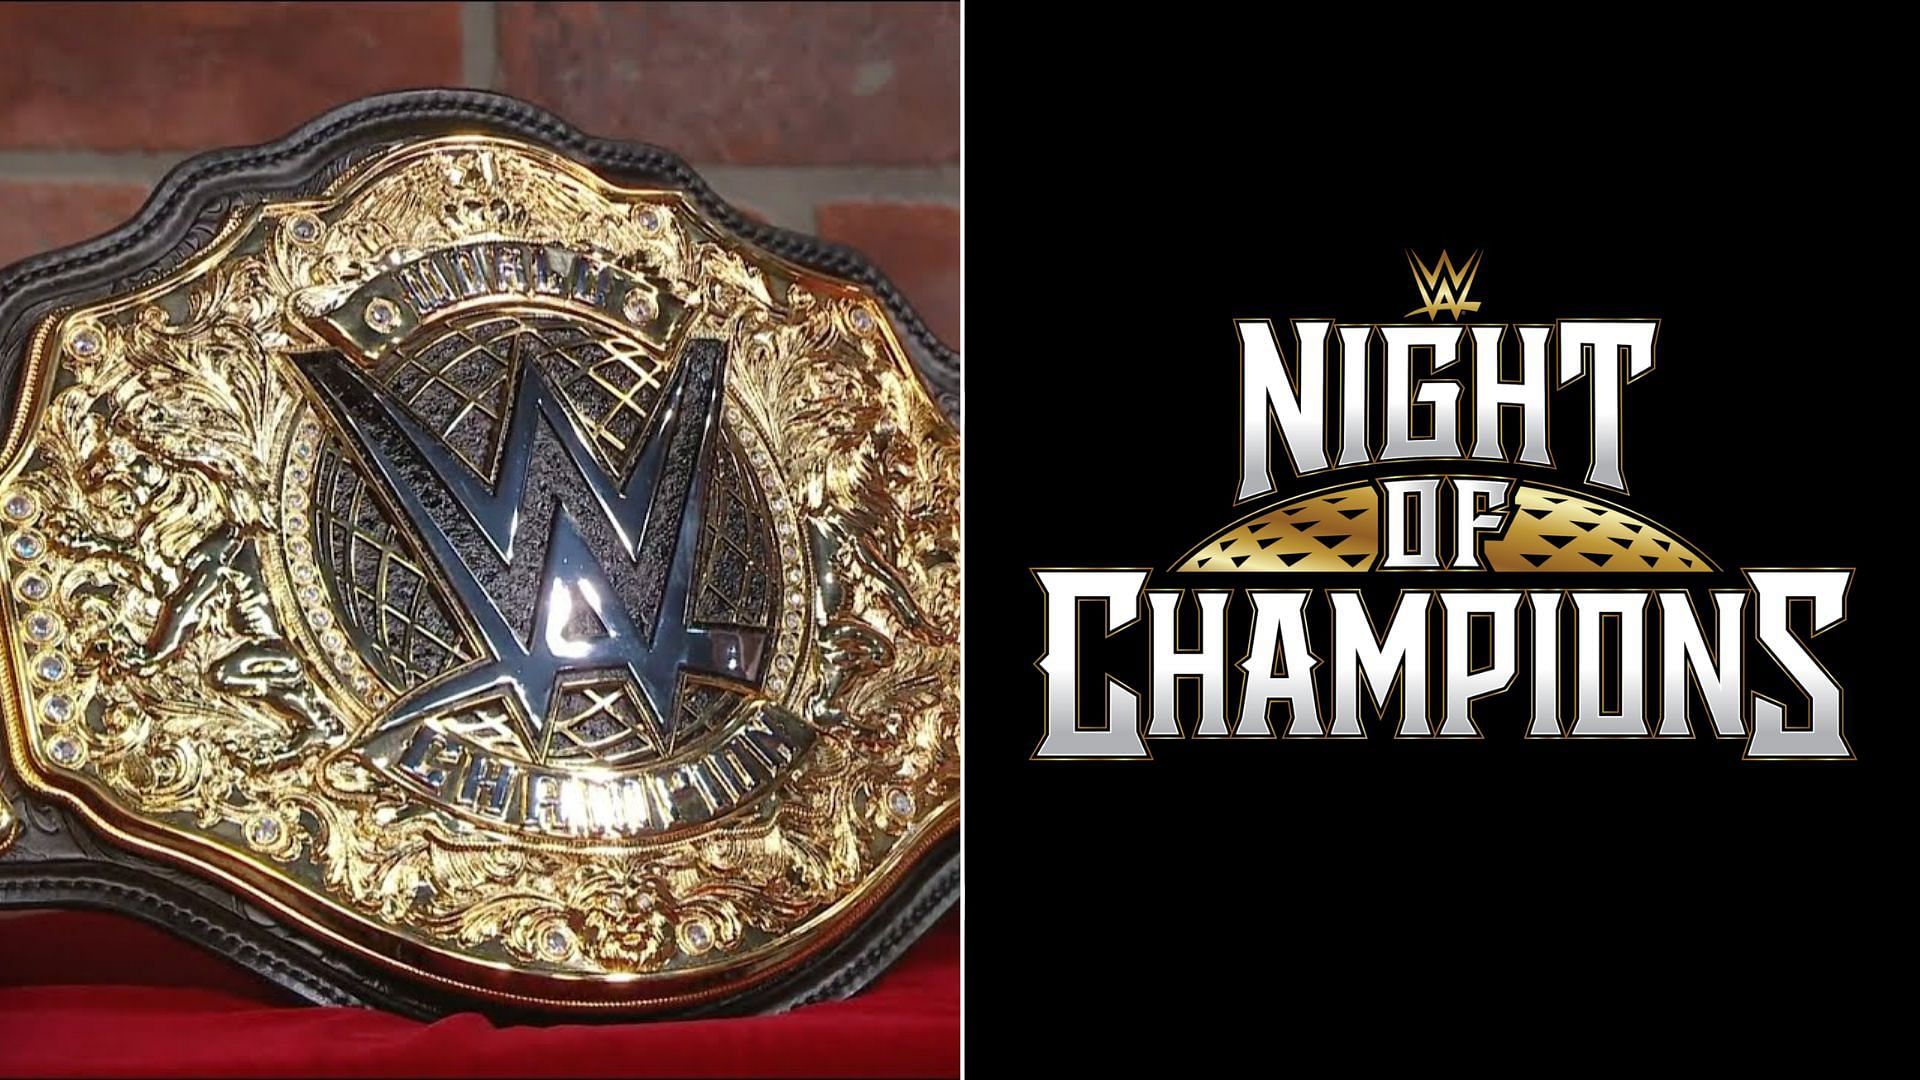 A new World Heavyweight Champion was crowned at Night of Champions 2023!